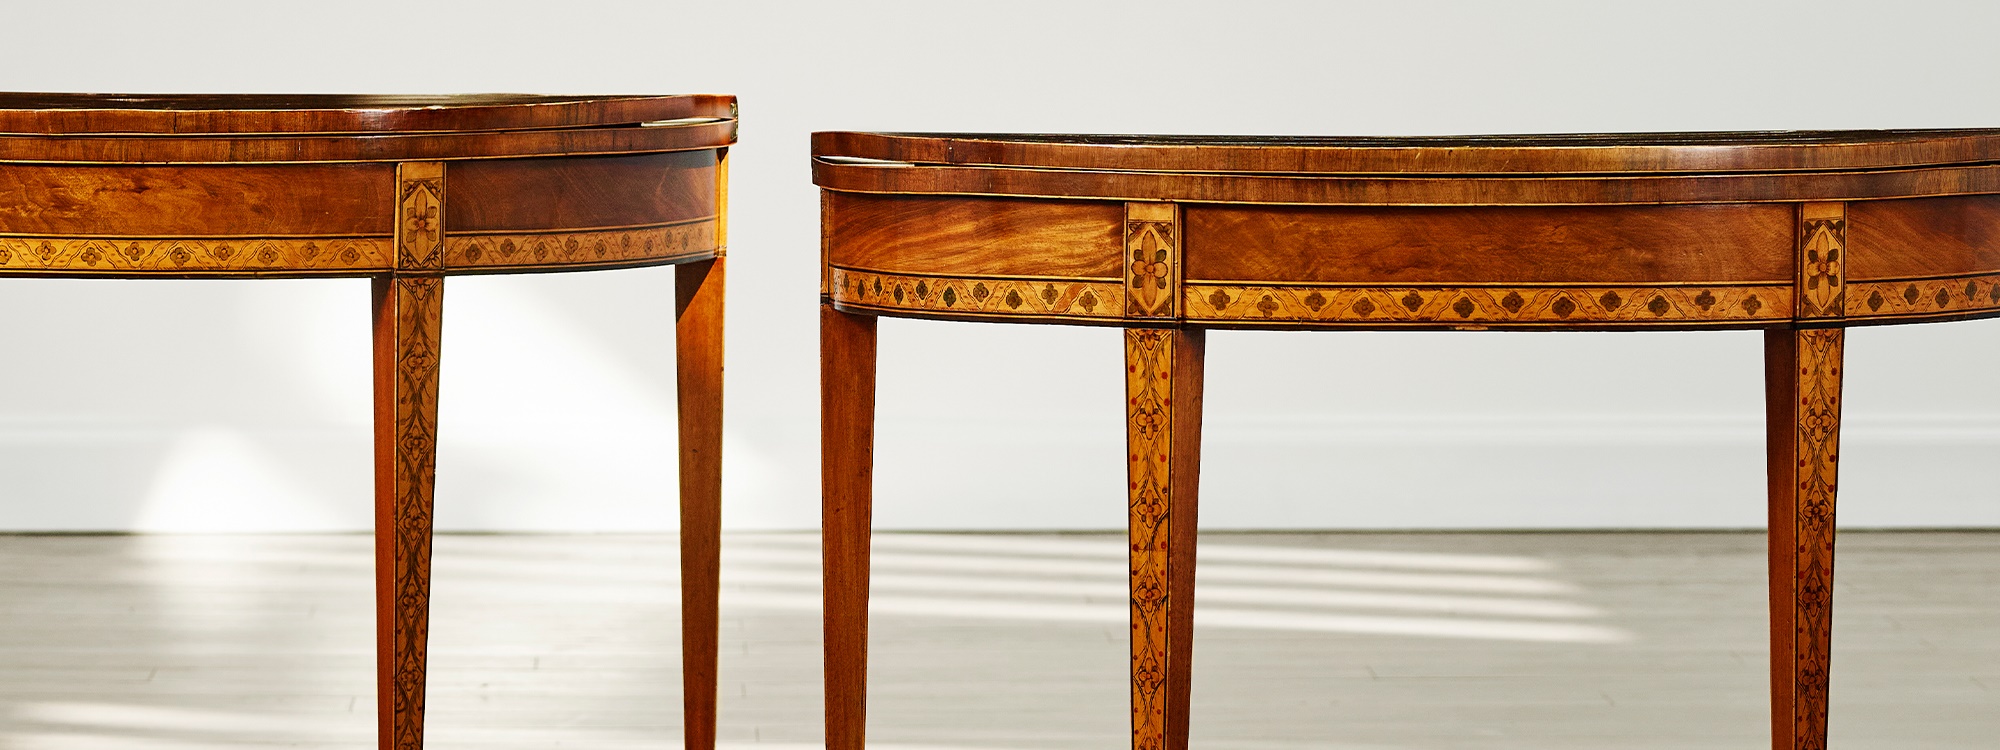 Penwork Card Tables from Paxton House